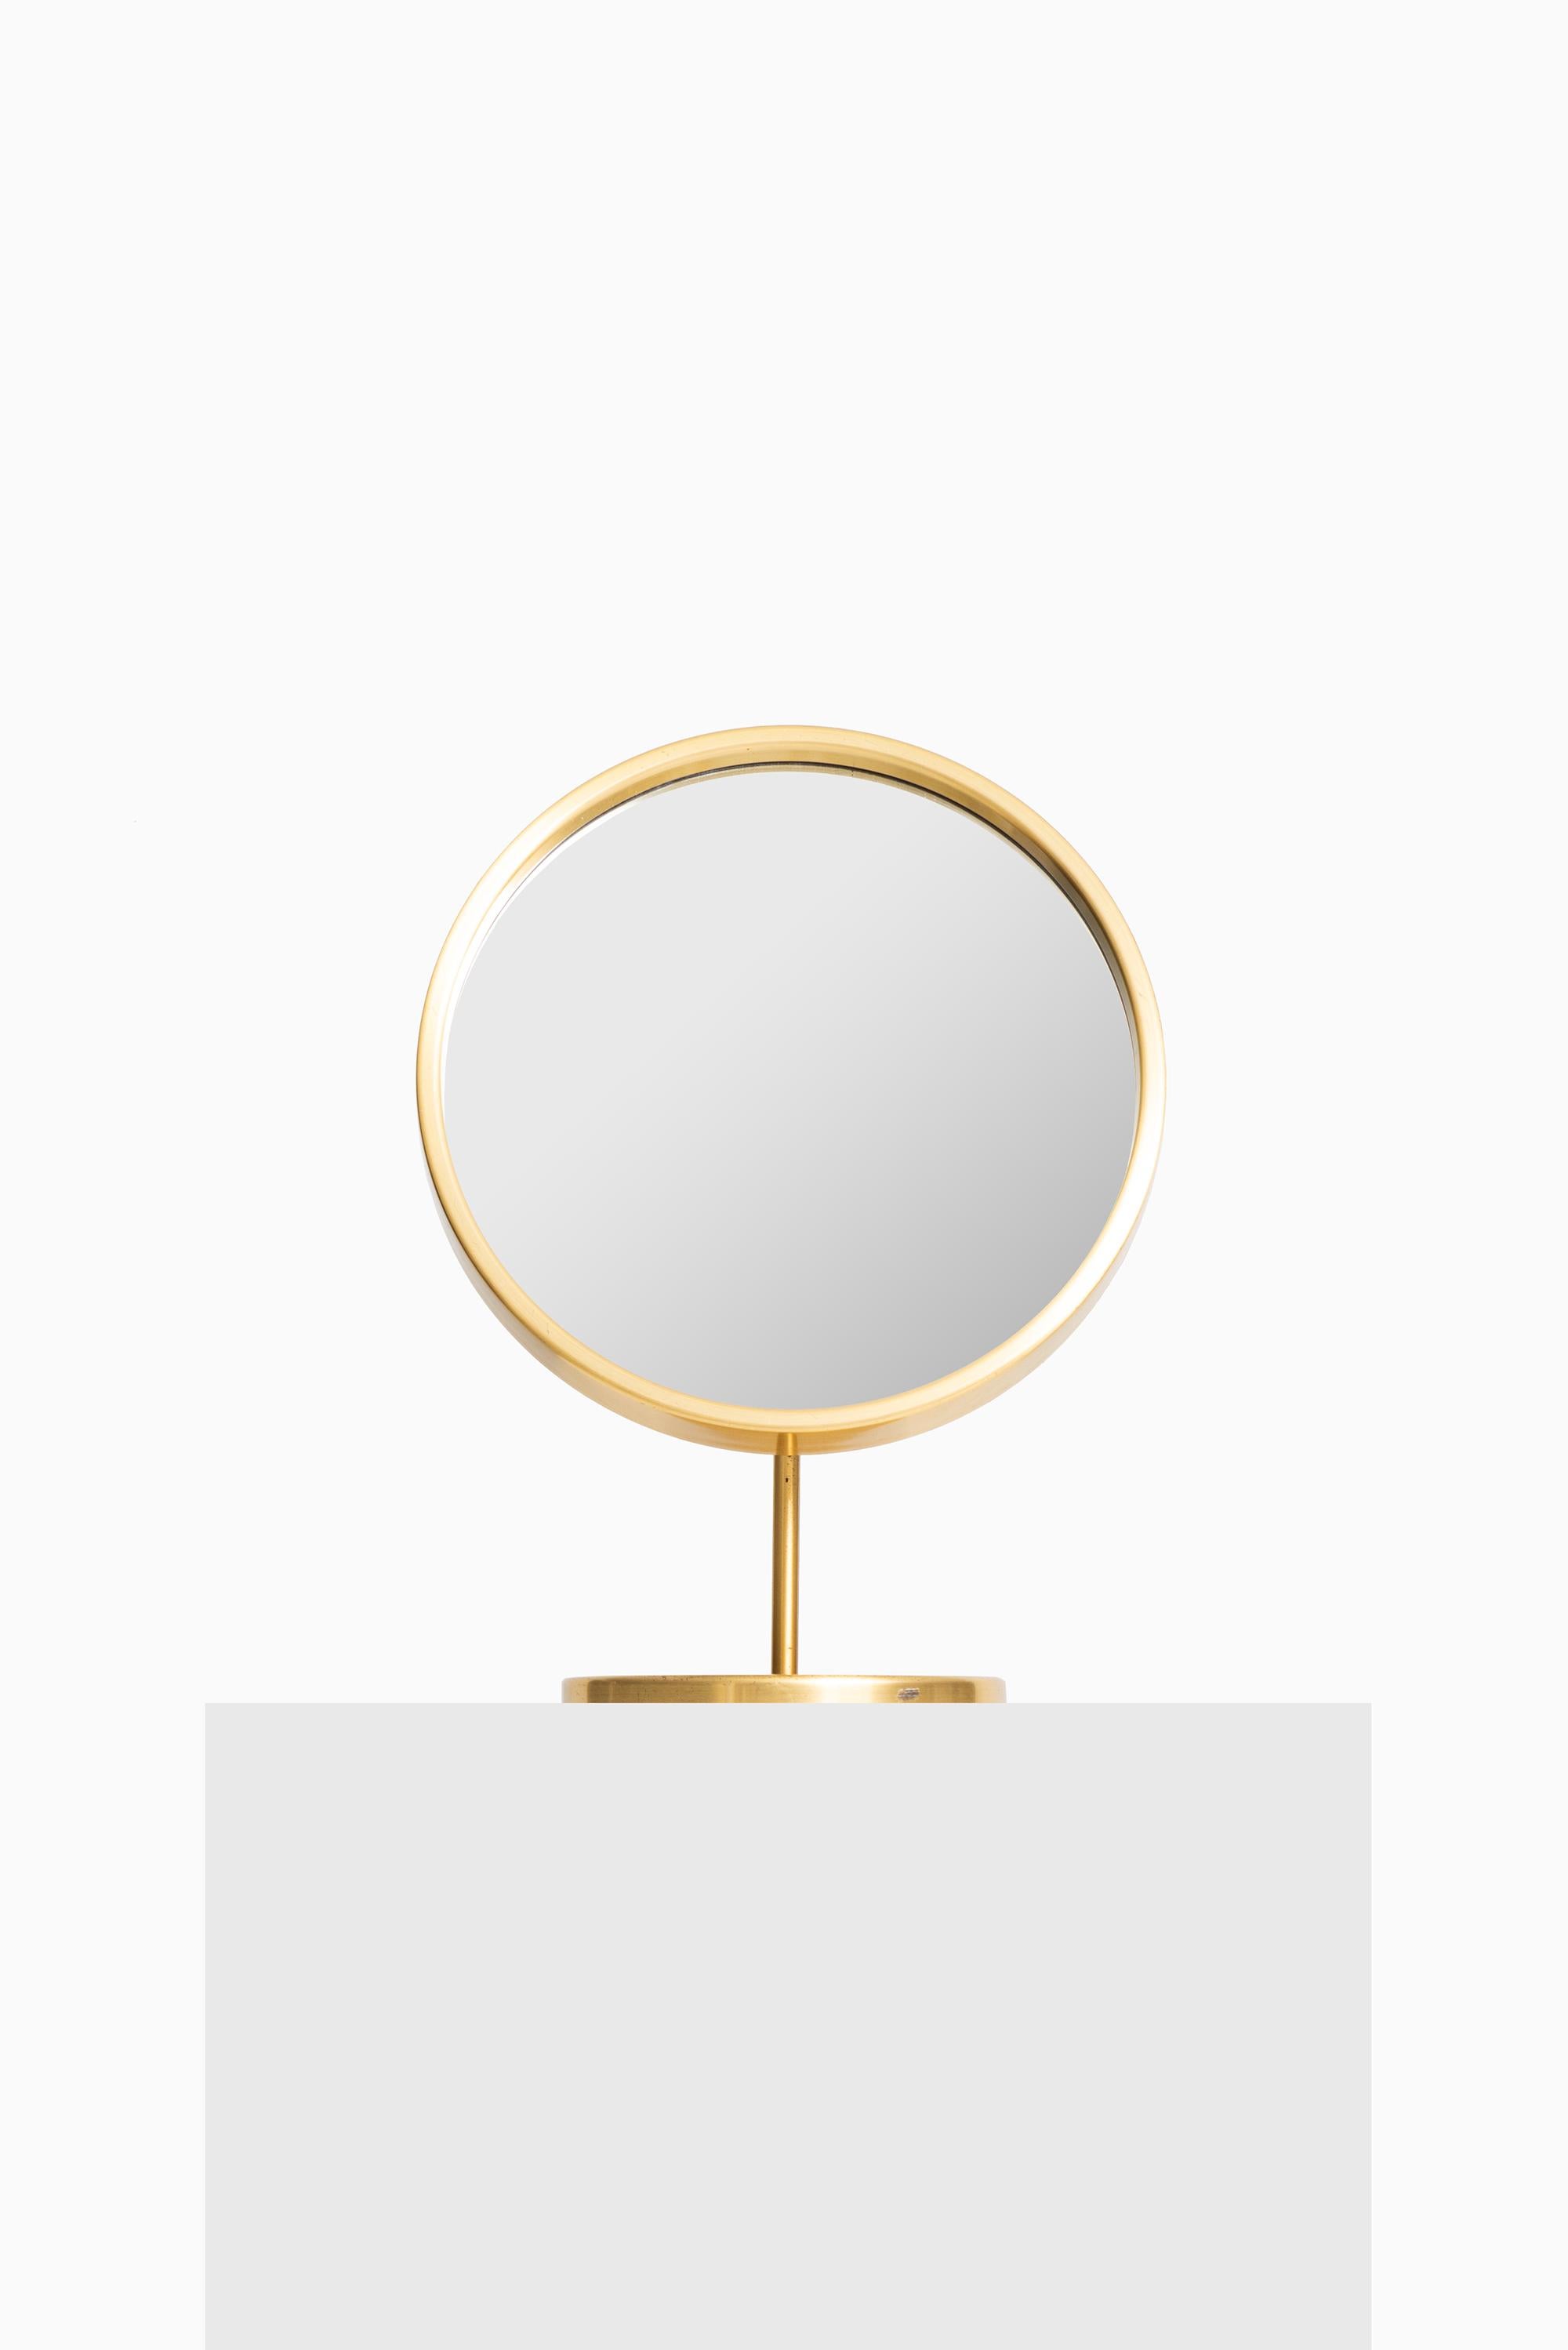 Rare table mirror in brass. Produced by Glas Mäster in Markaryd, Sweden.